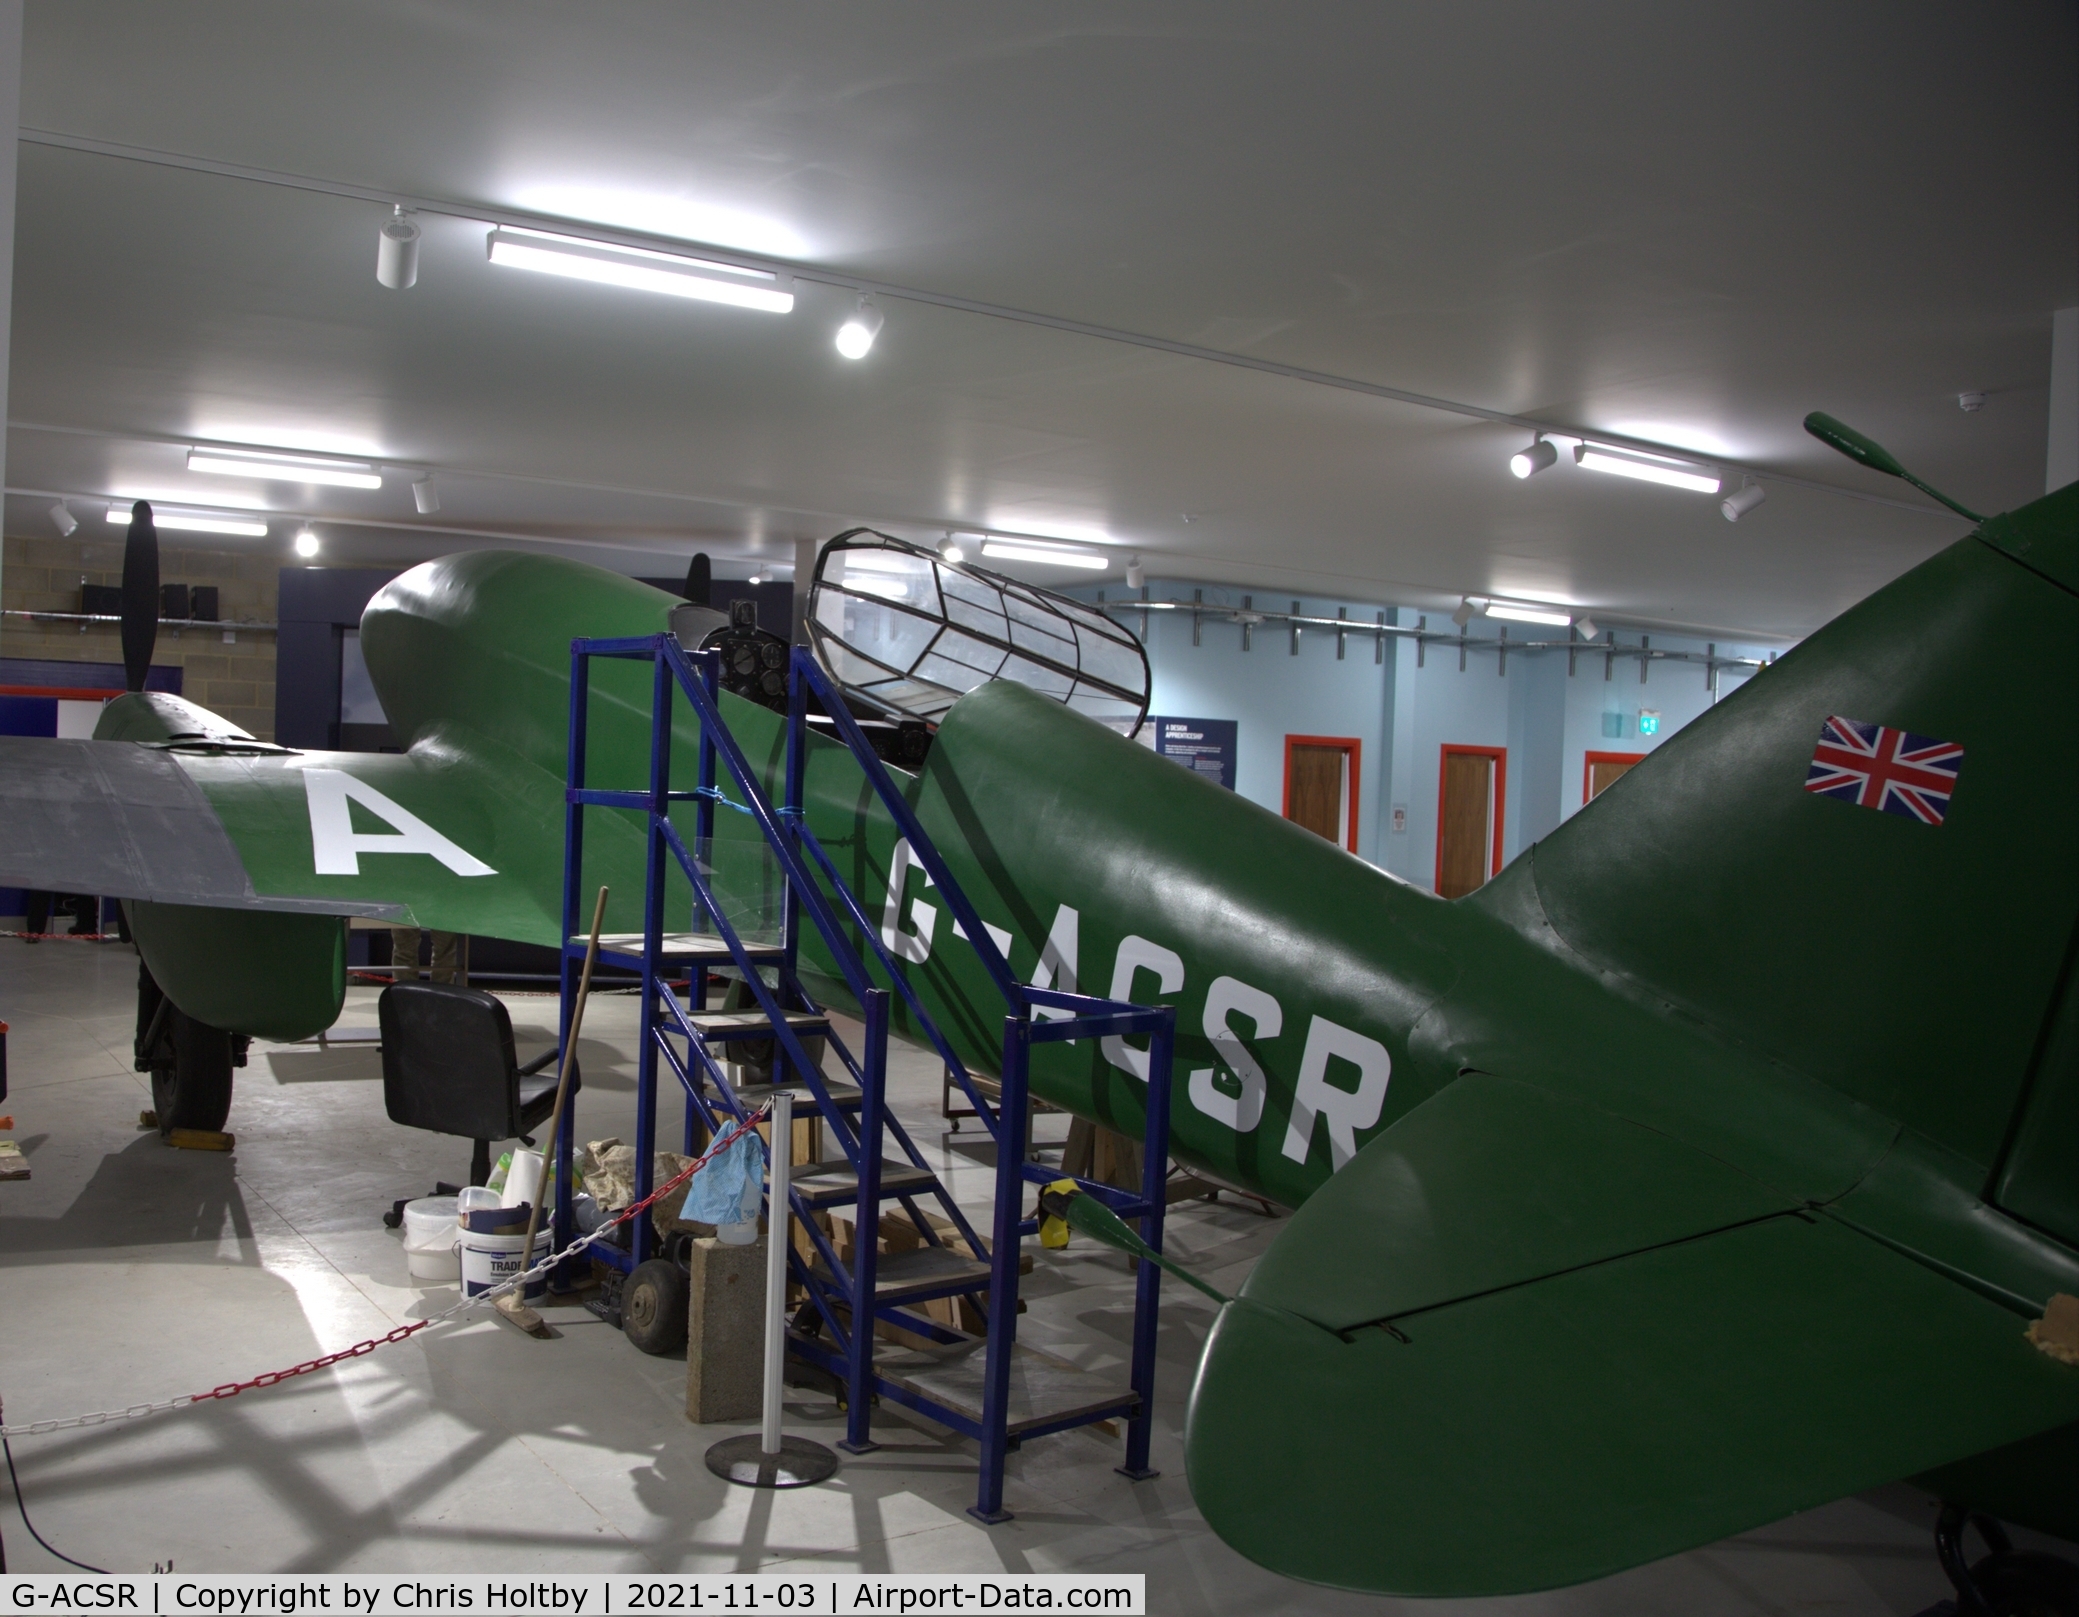 G-ACSR, 1934 De Havilland DH-88 Comet C/N 1995, This replica exists in the DH Museum at London Colney, Herts. The original DH Racer was destroyed in a hangar fire at Istres, France in June 1940.